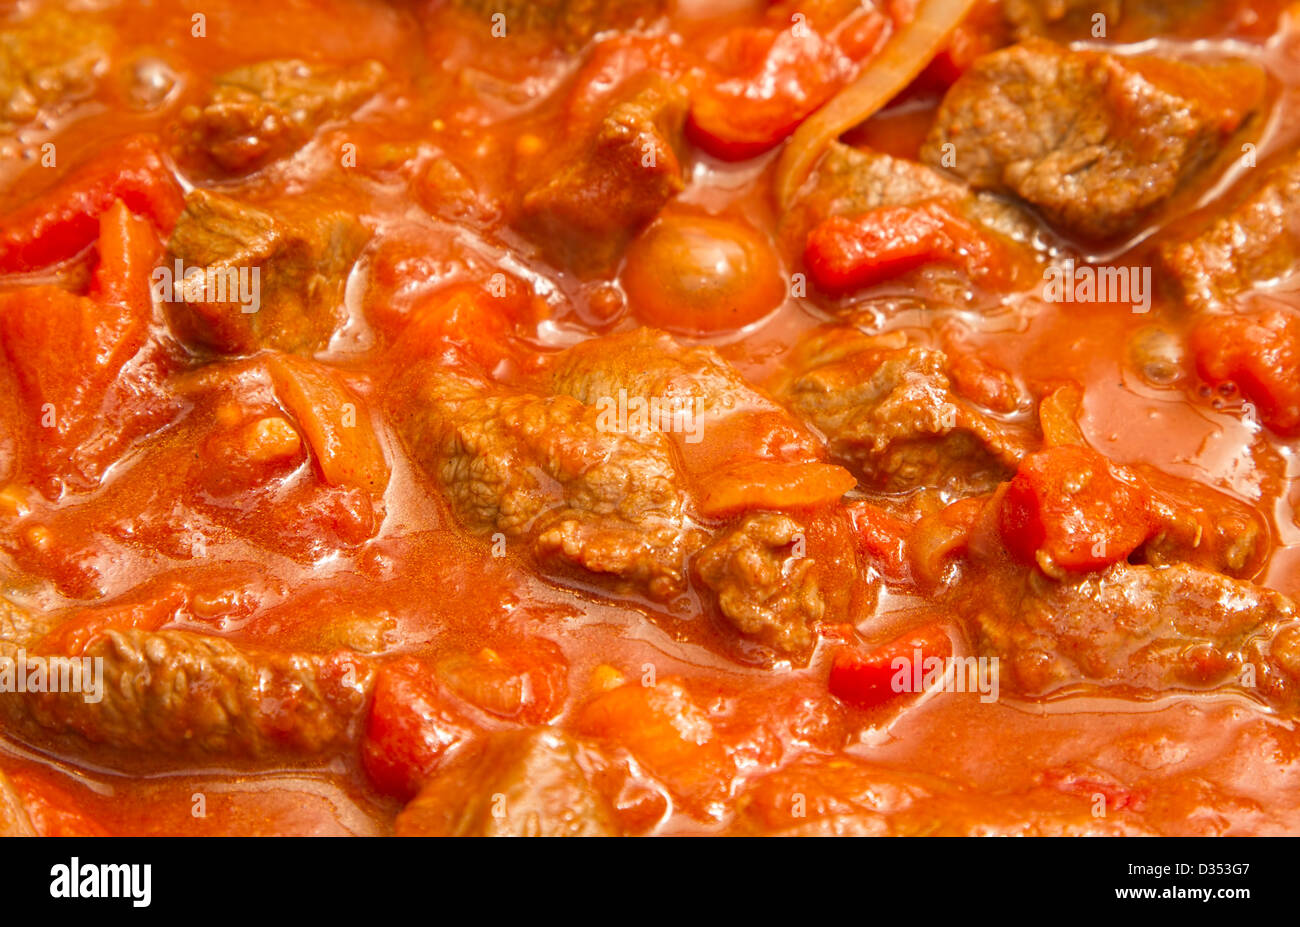 Beef goulash cooking in a pan Stock Photo